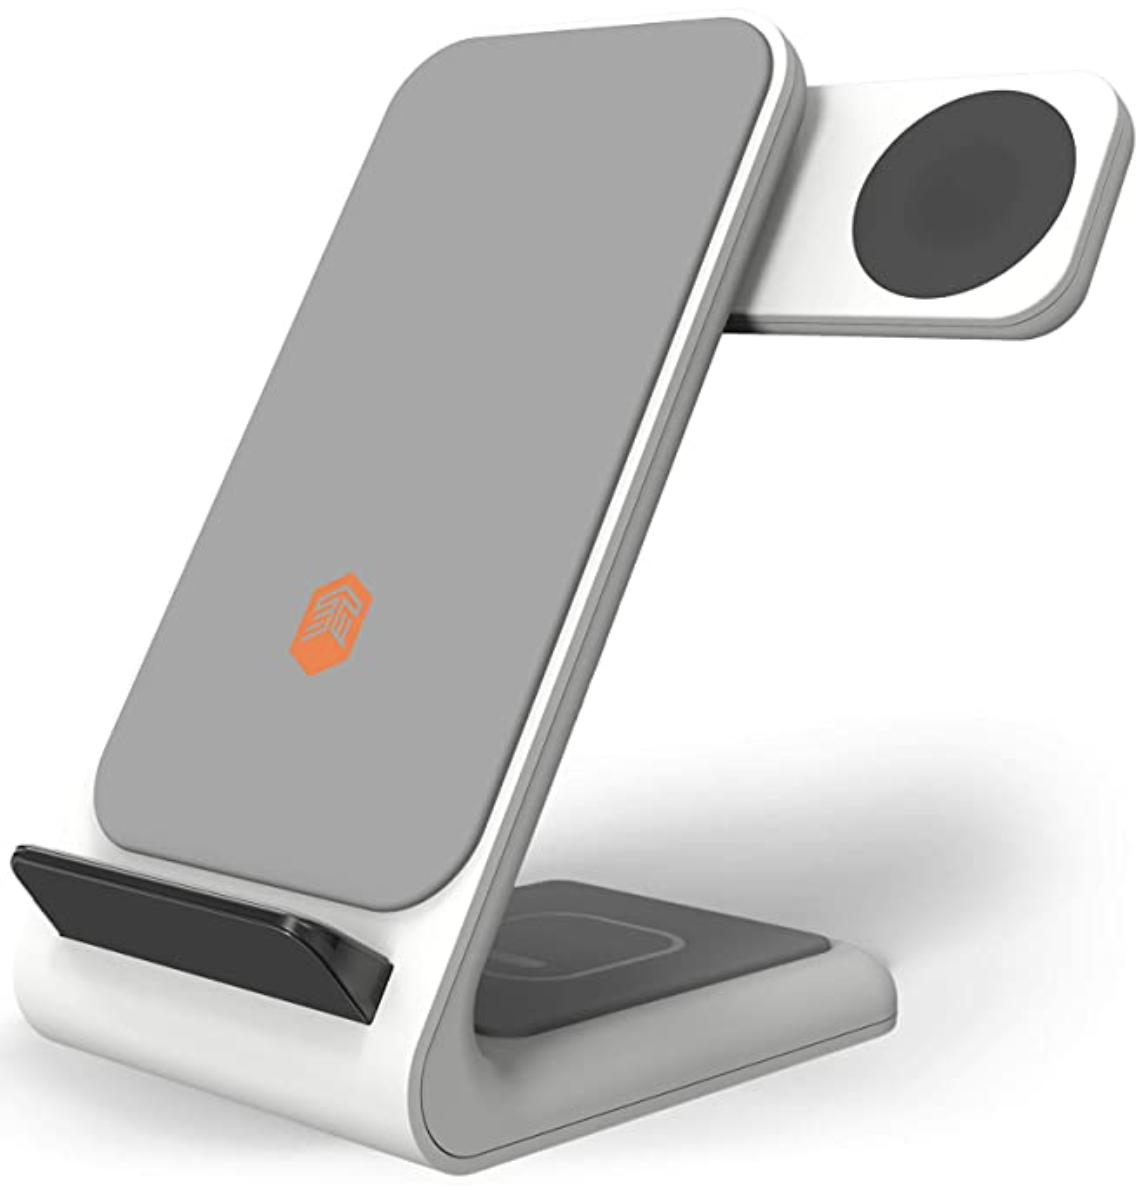 Stm Goods Chargetree Swing 3 In 1 Charging Station Render Cropped